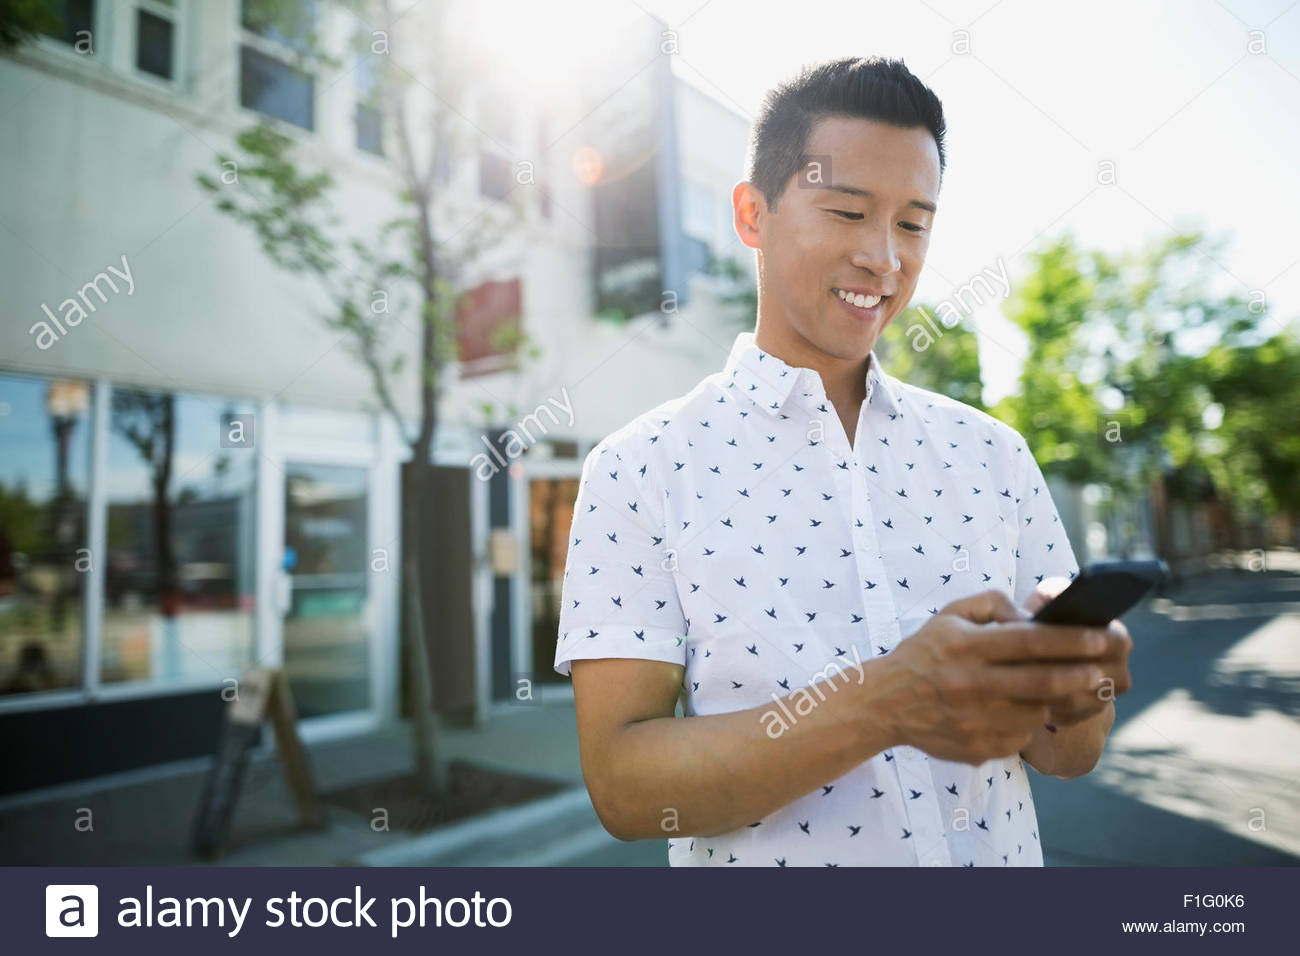 Smiling man texting with cell phone on sunny street Banque D'Images